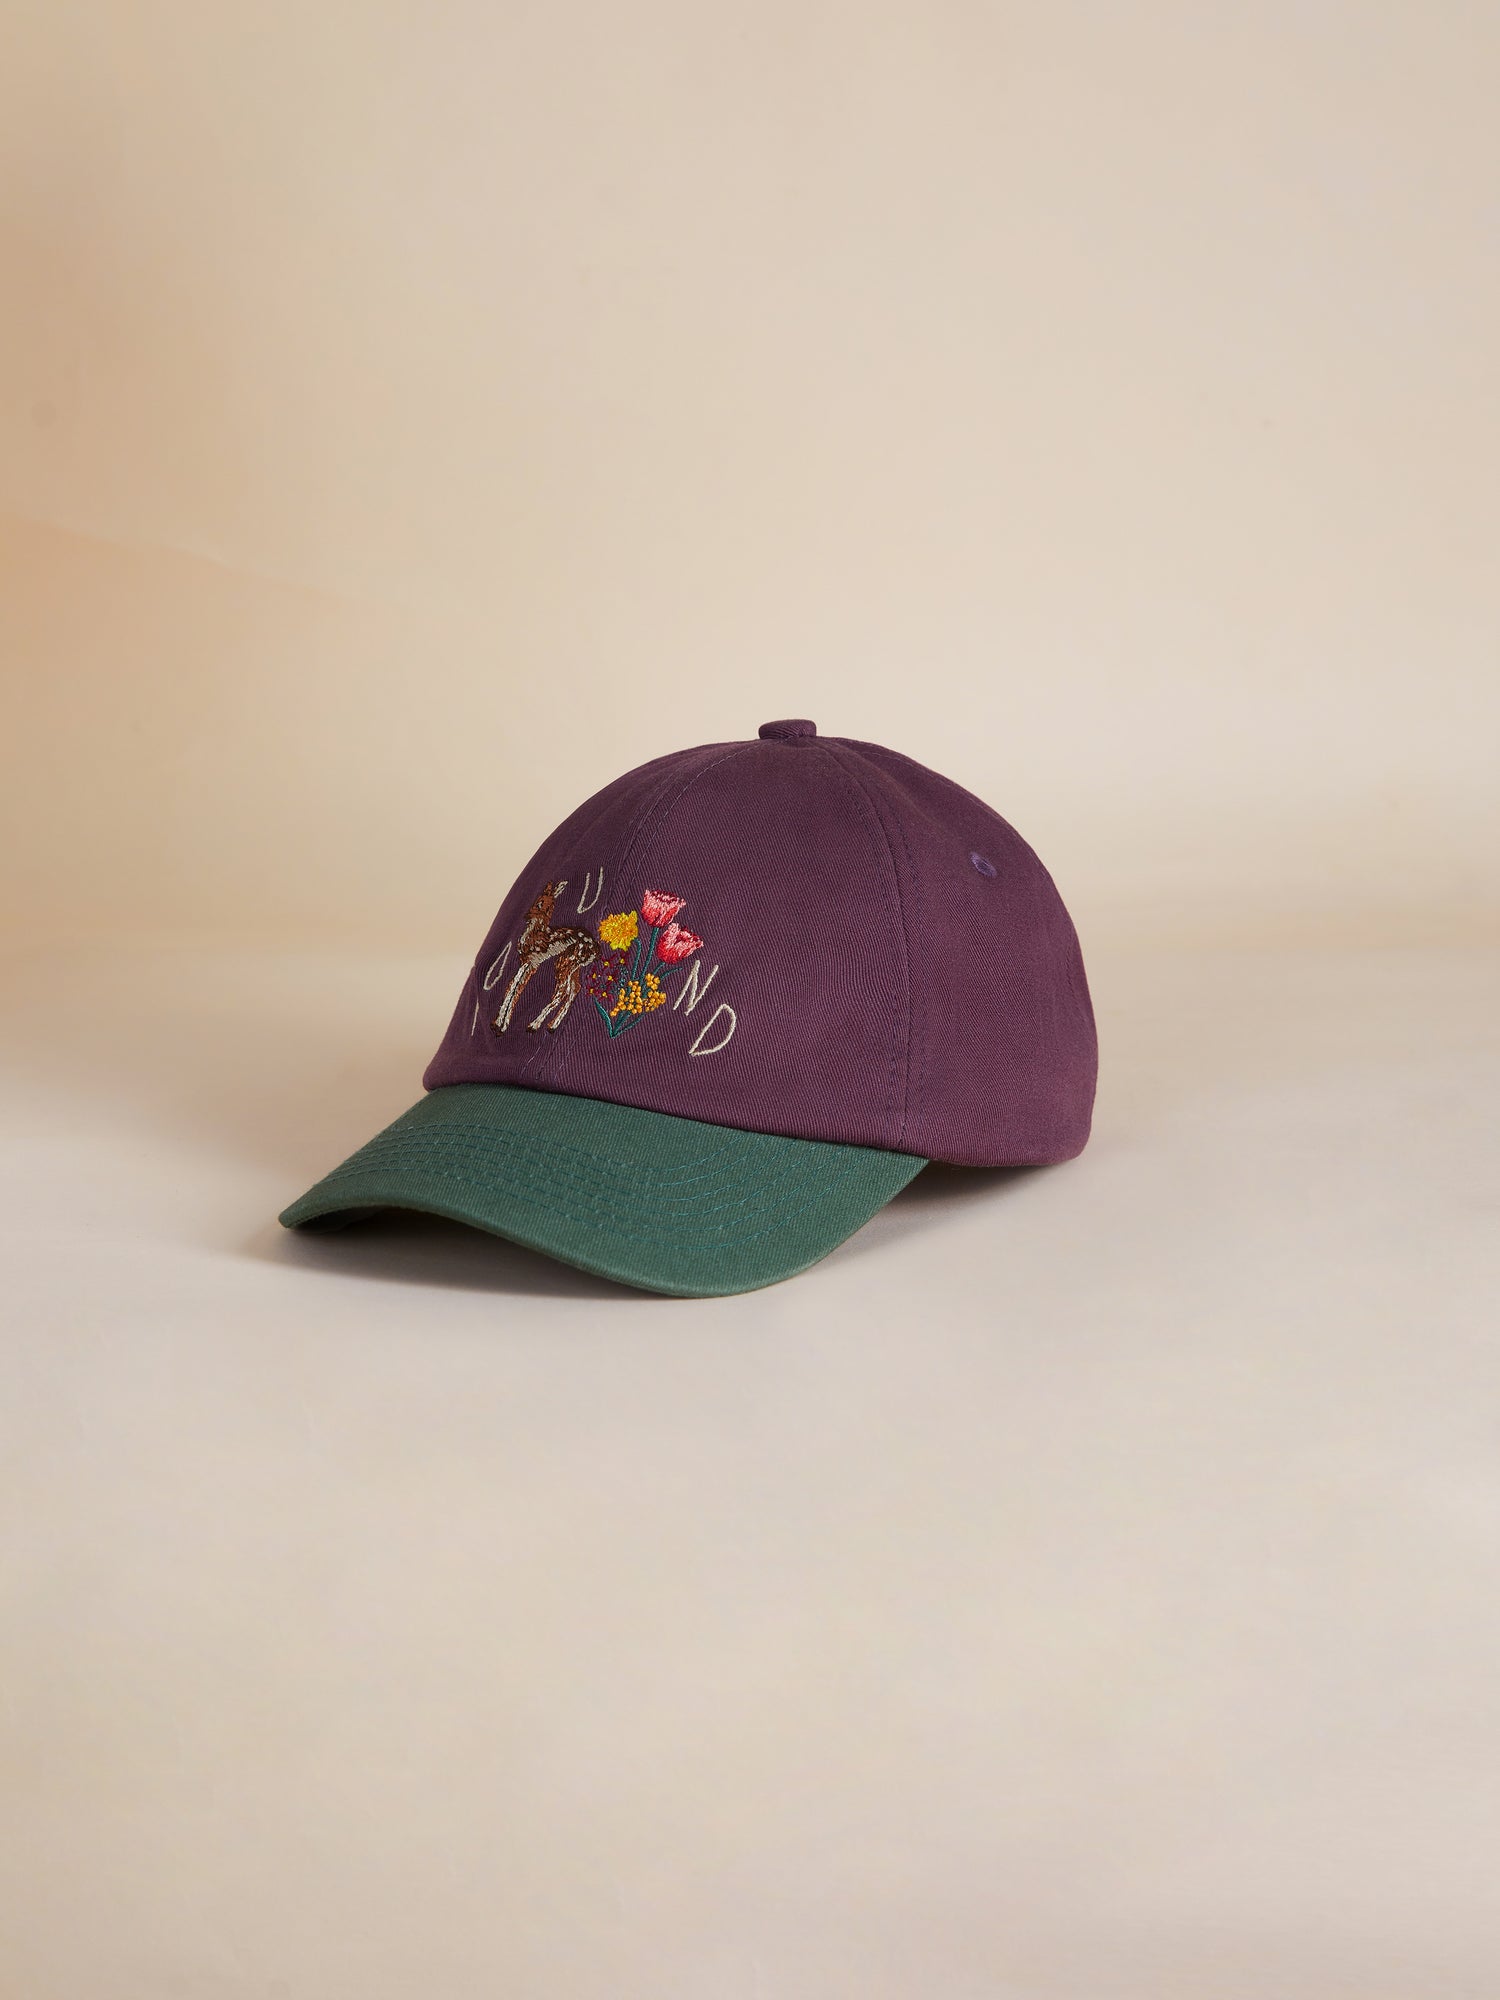 A Flower Deer Cap with an embroidered flower on it. (Found)